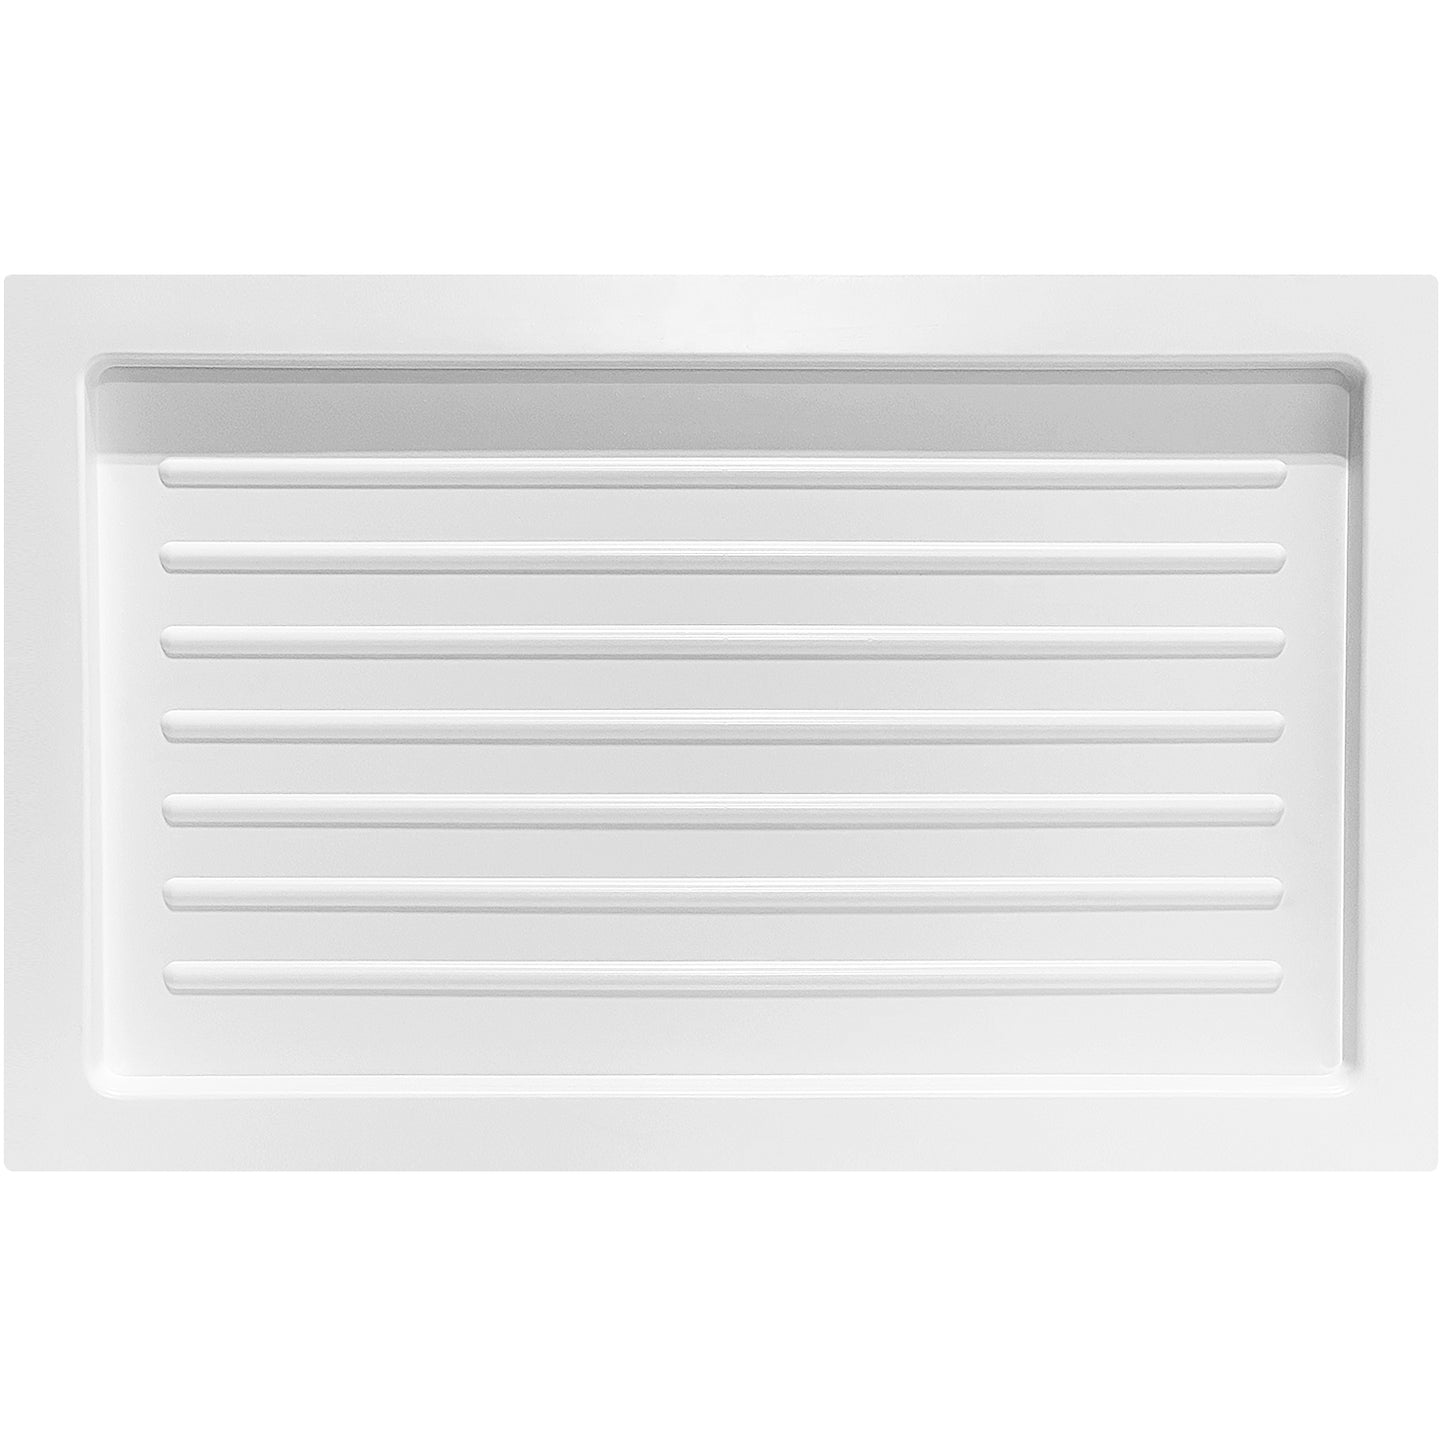 Back of large outward mounted vent cover (white)